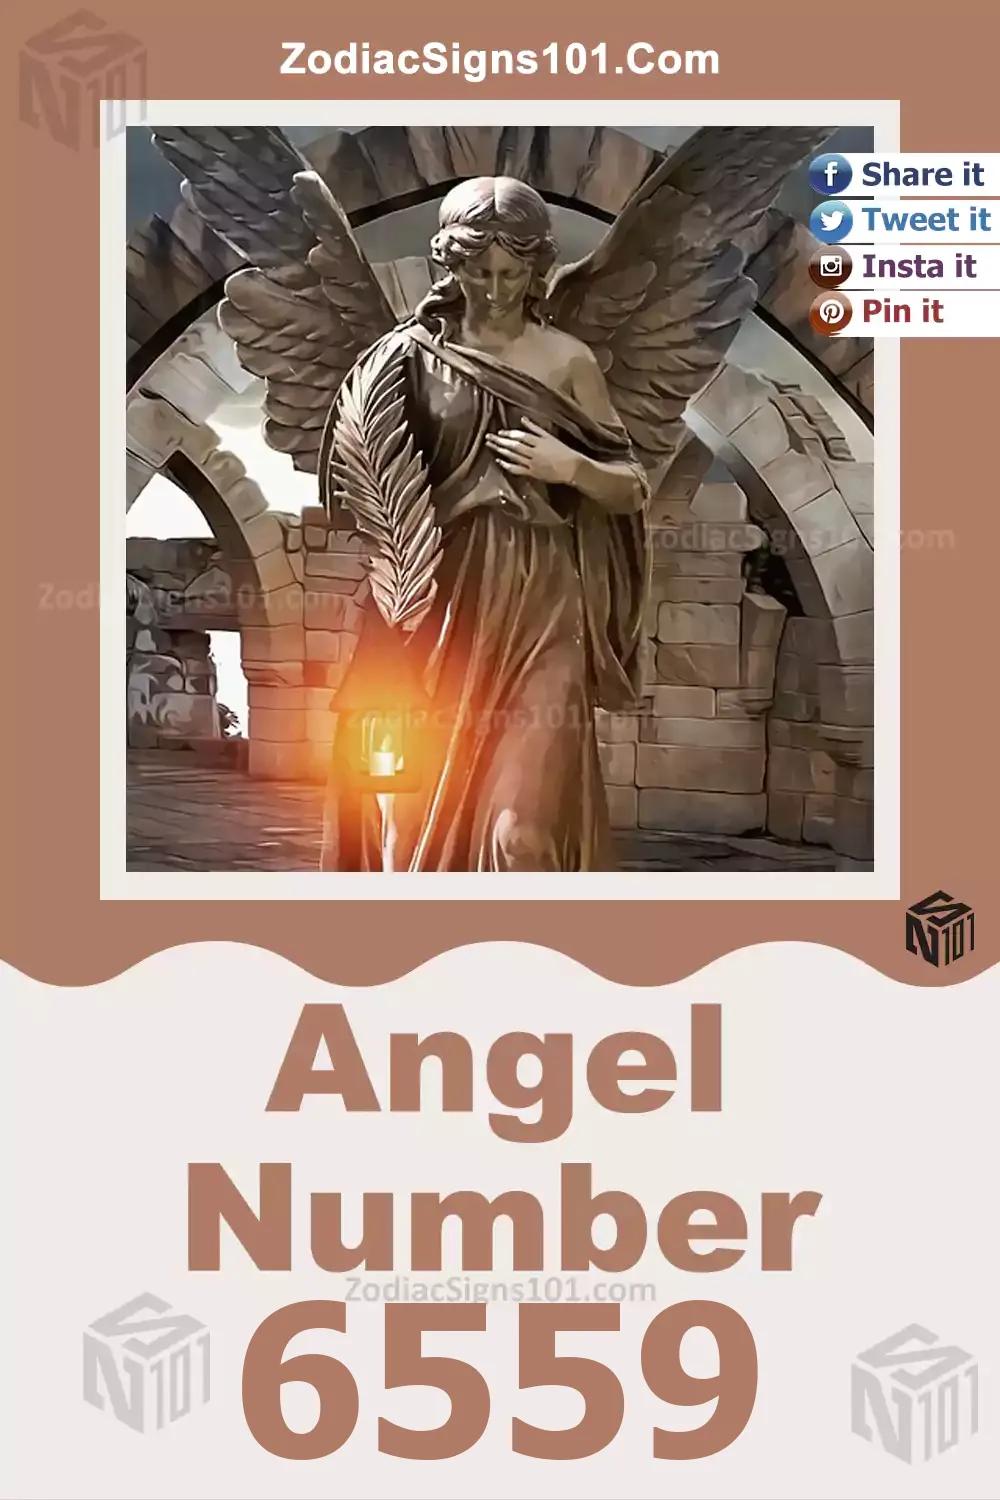 6559 Angel Number Meaning